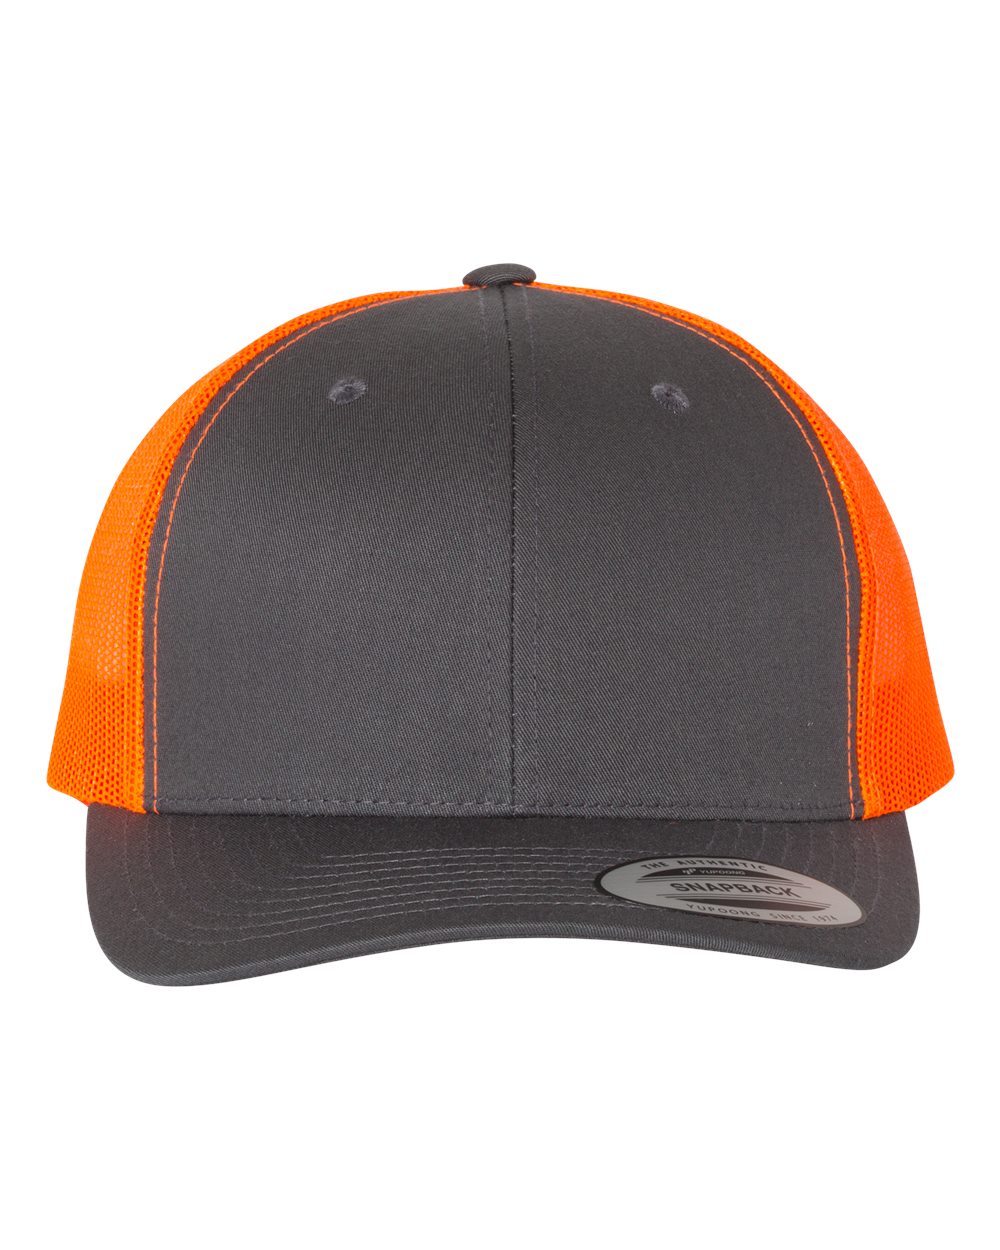 TRUCKER CAP WITH PVC RUBBER CHAMPION PATCH – Jacourt Sports